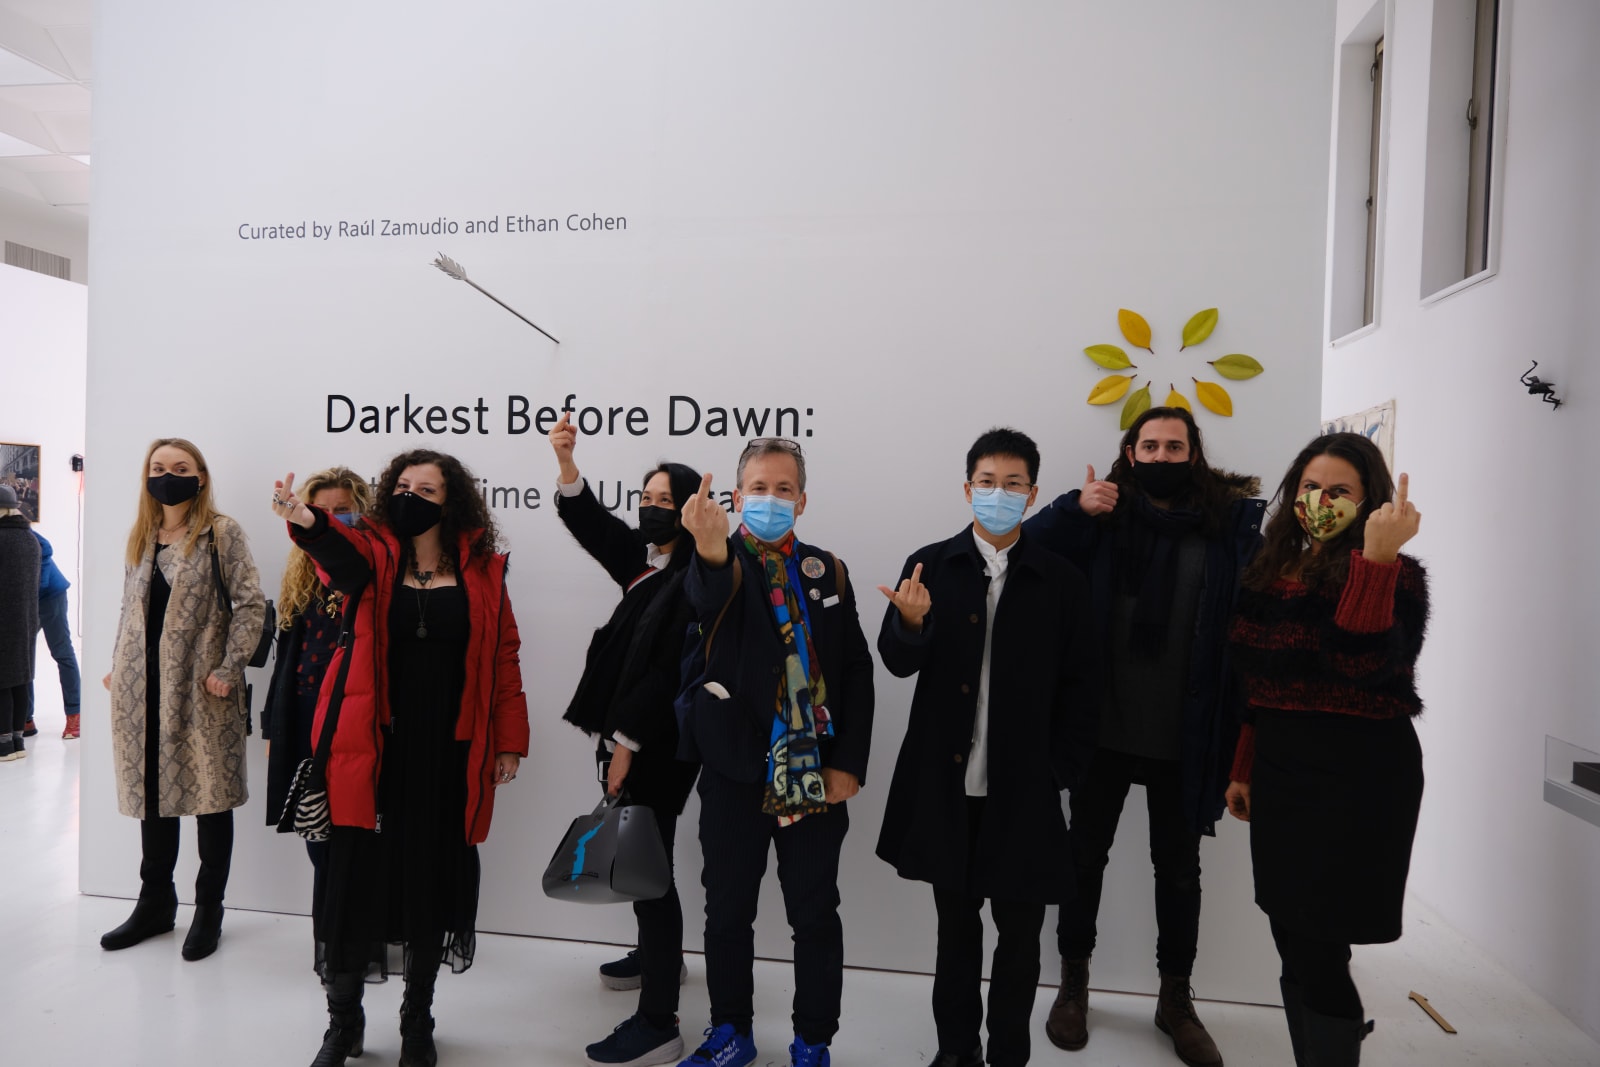 Darkest Before Dawn: Art in a time of Uncertainty